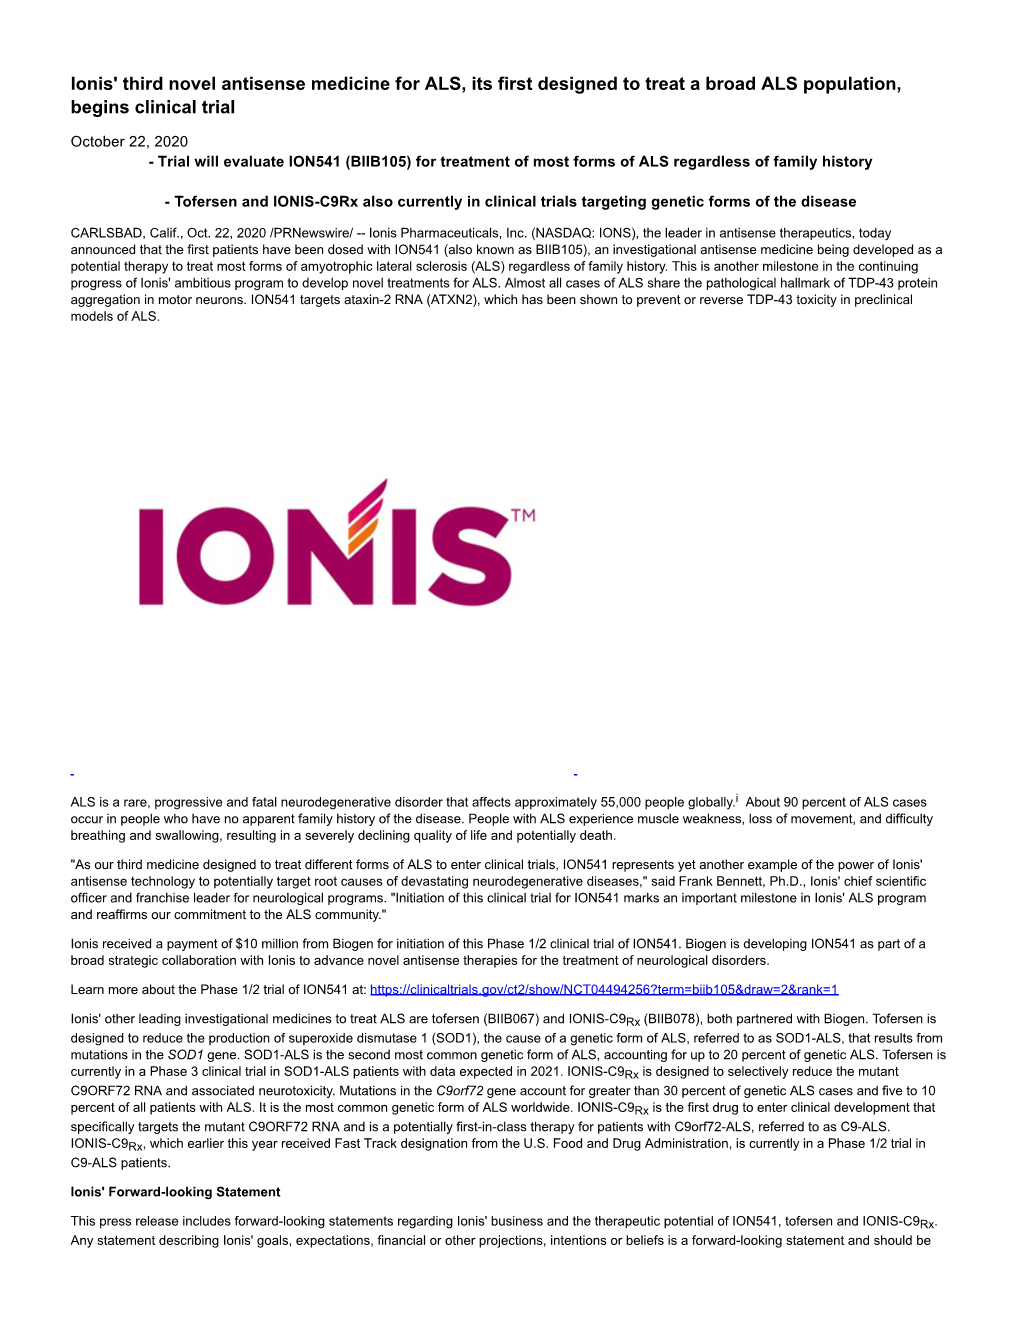 Ionis' Third Novel Antisense Medicine for ALS, Its First Designed to Treat a Broad ALS Population, Begins Clinical Trial